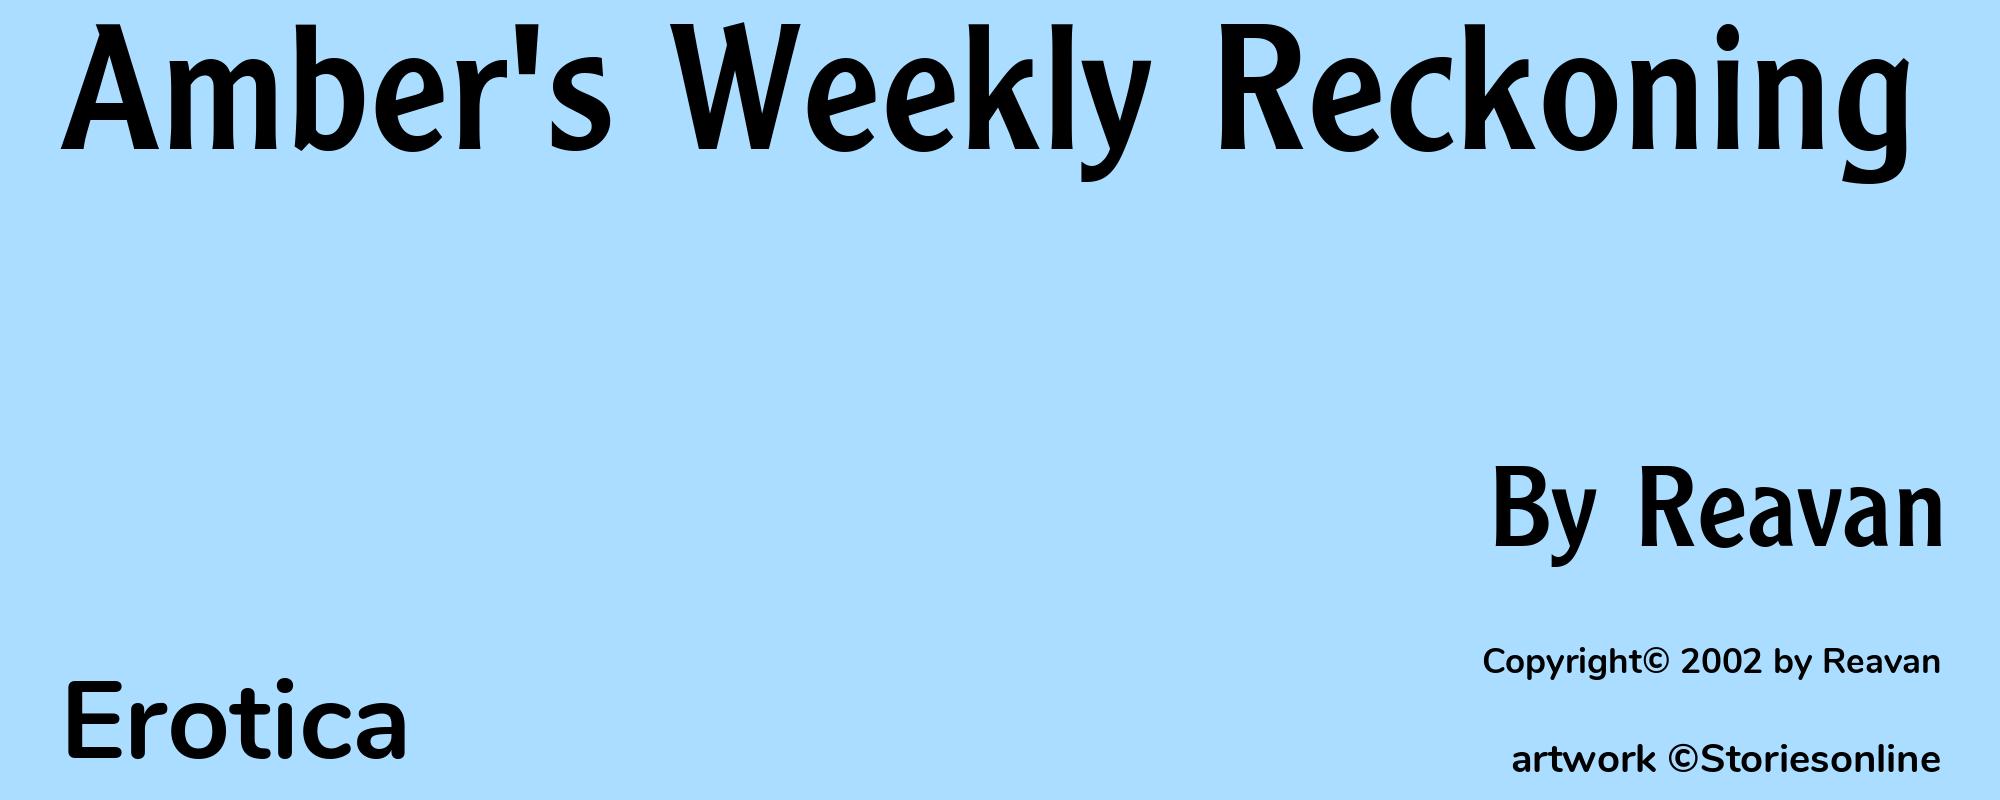 Amber's Weekly Reckoning - Cover